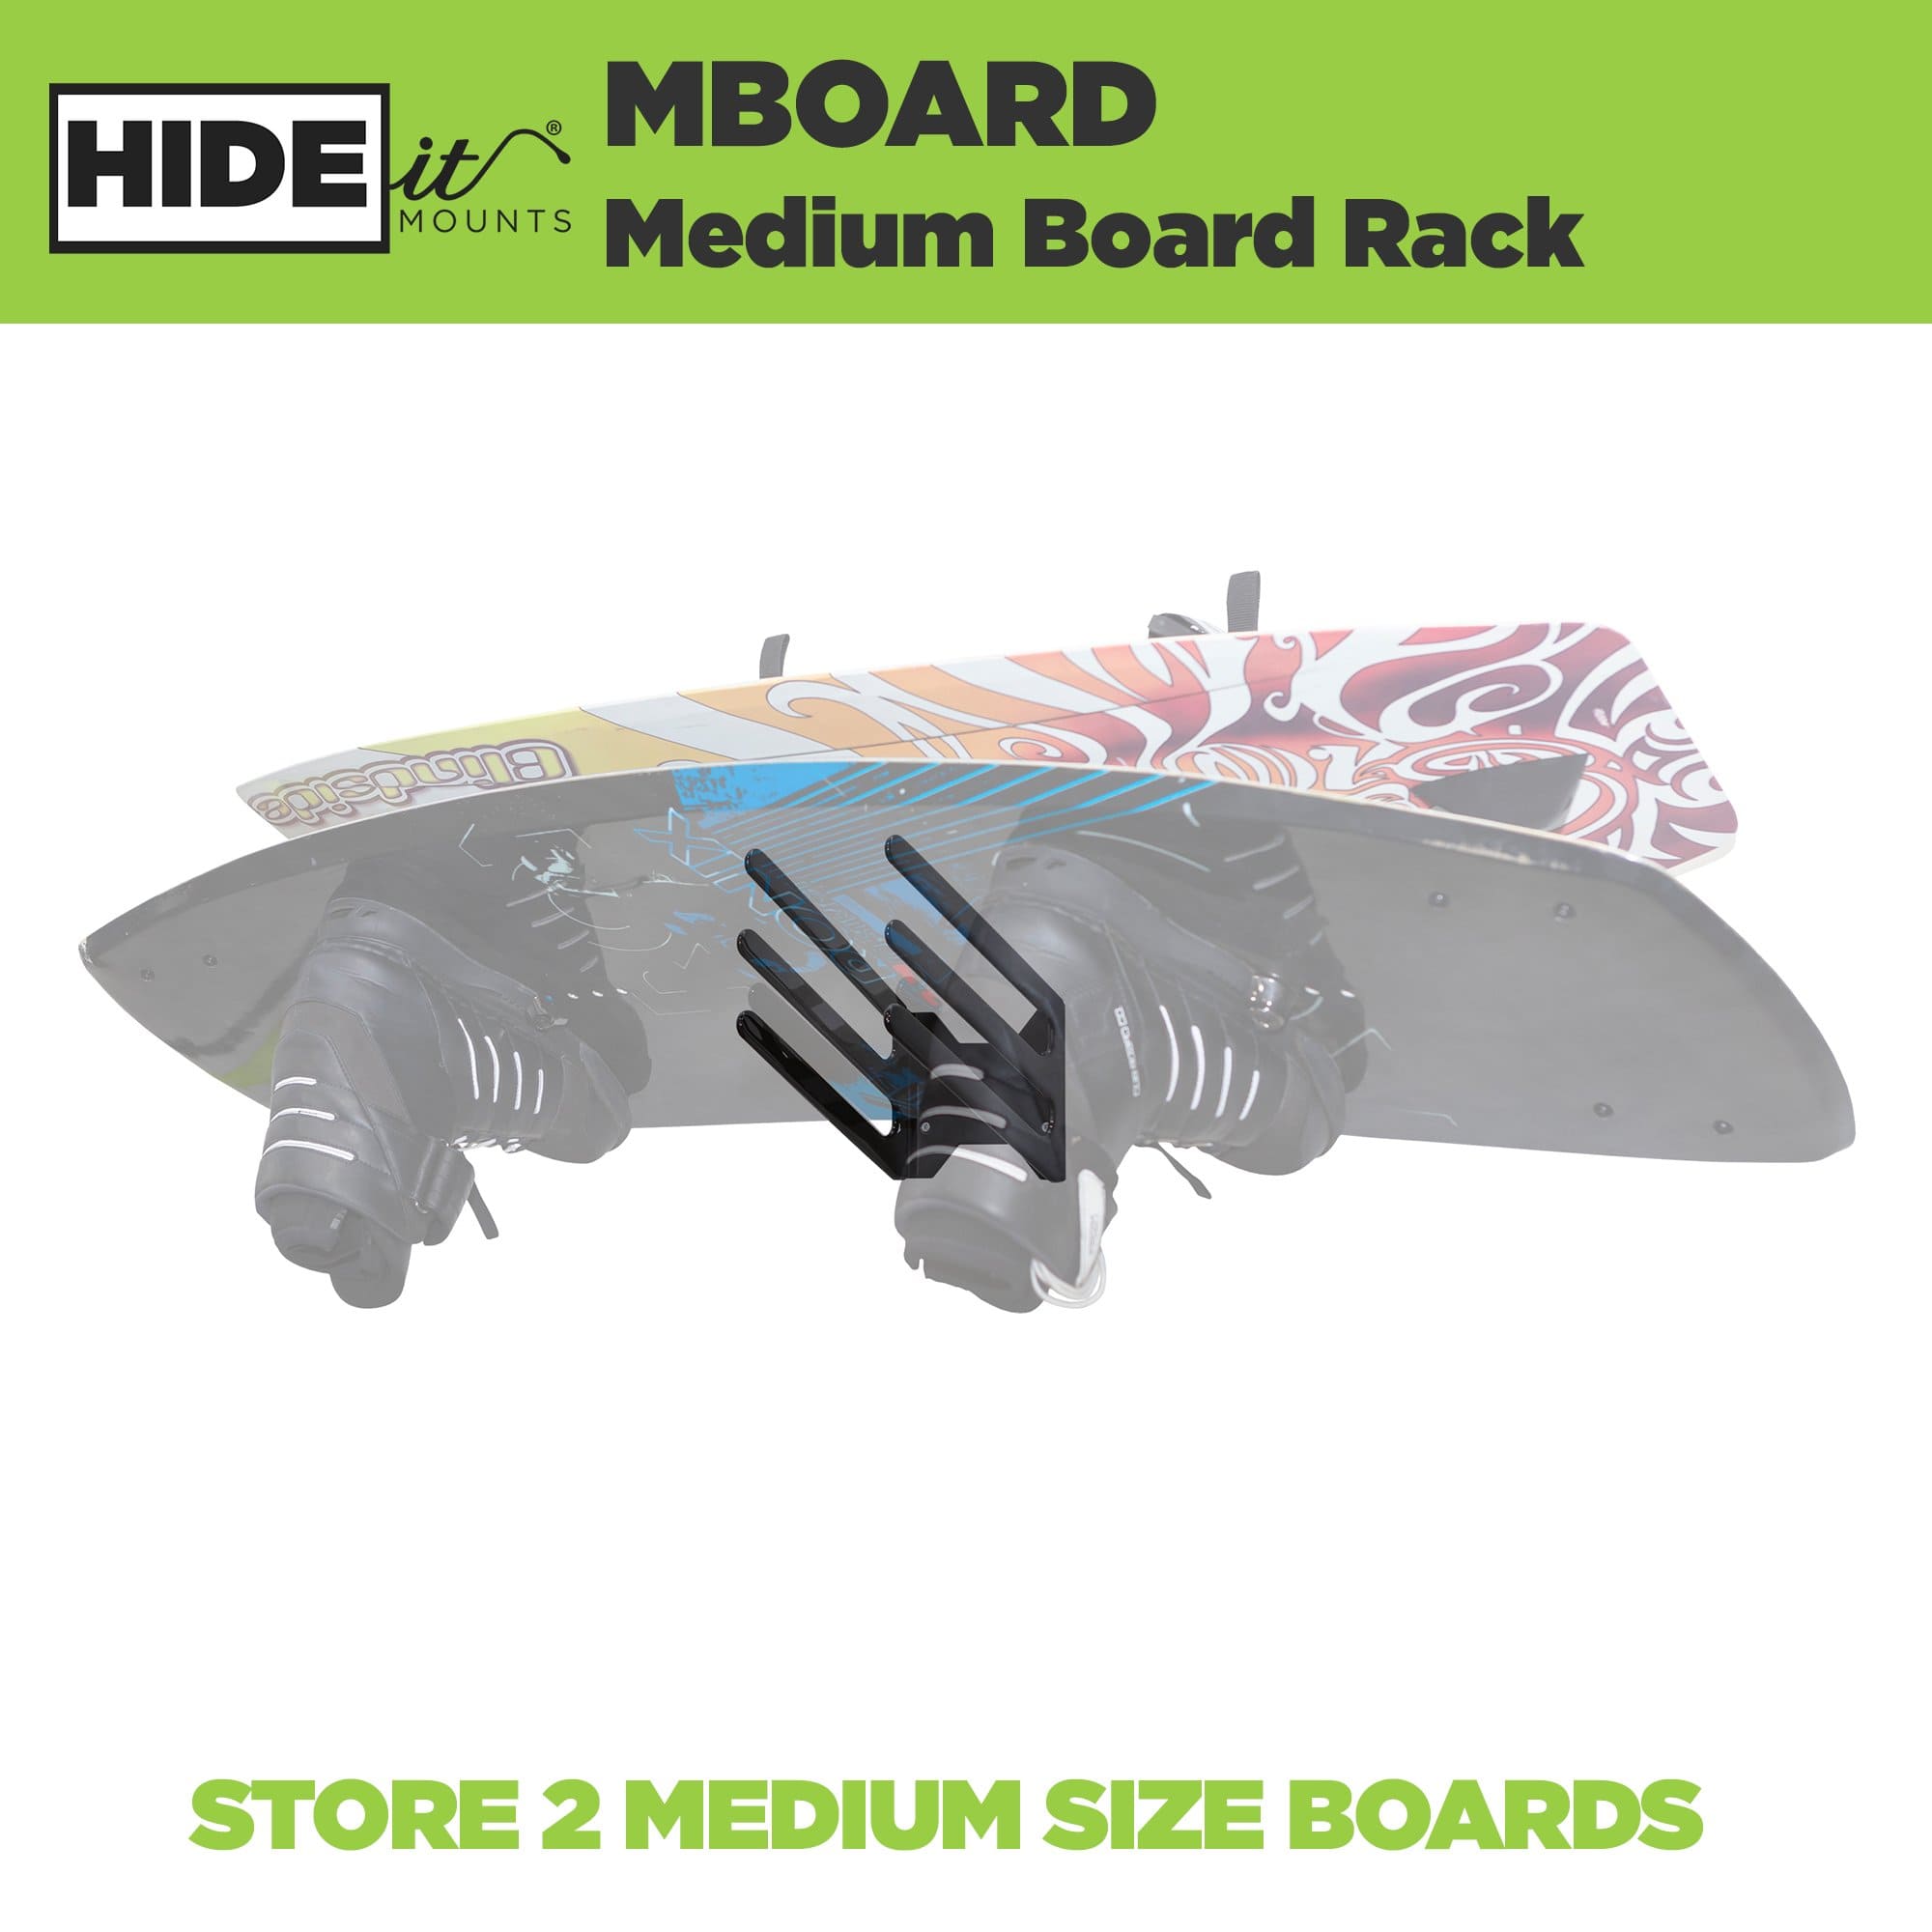 HIDEit MBoard Medium Board Rack greyed out with 2 wakeboards securely held in the mount. Store 2 medium size boards.